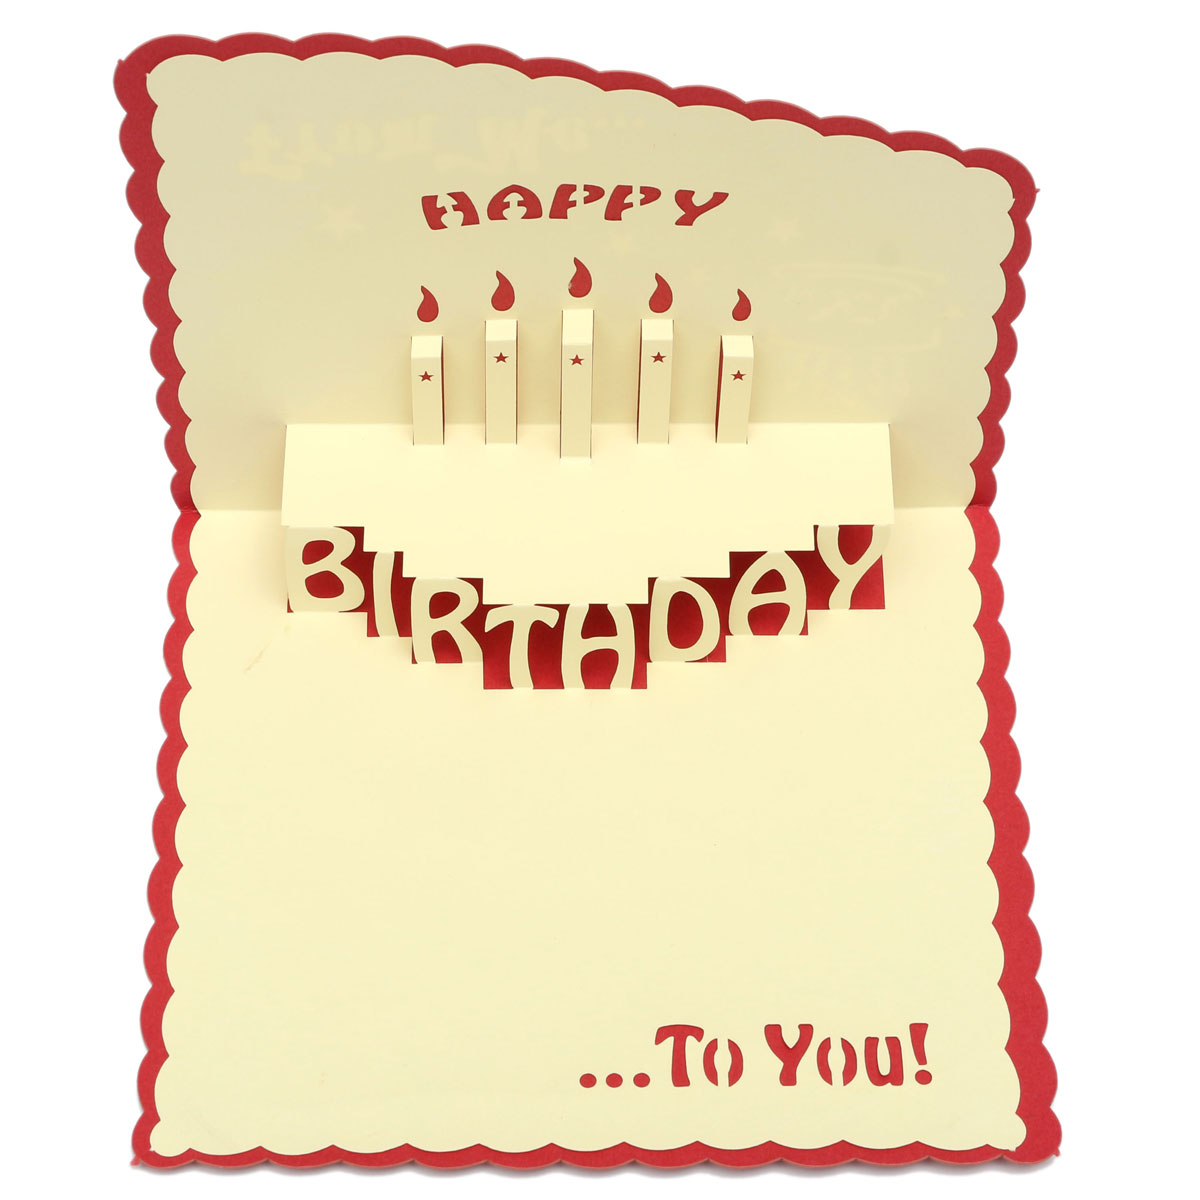 Happy-Birthday-3D-Greeting-Card-Pop-Up-Birthday-Party-Greeting-Card-With-Envelope-1033771